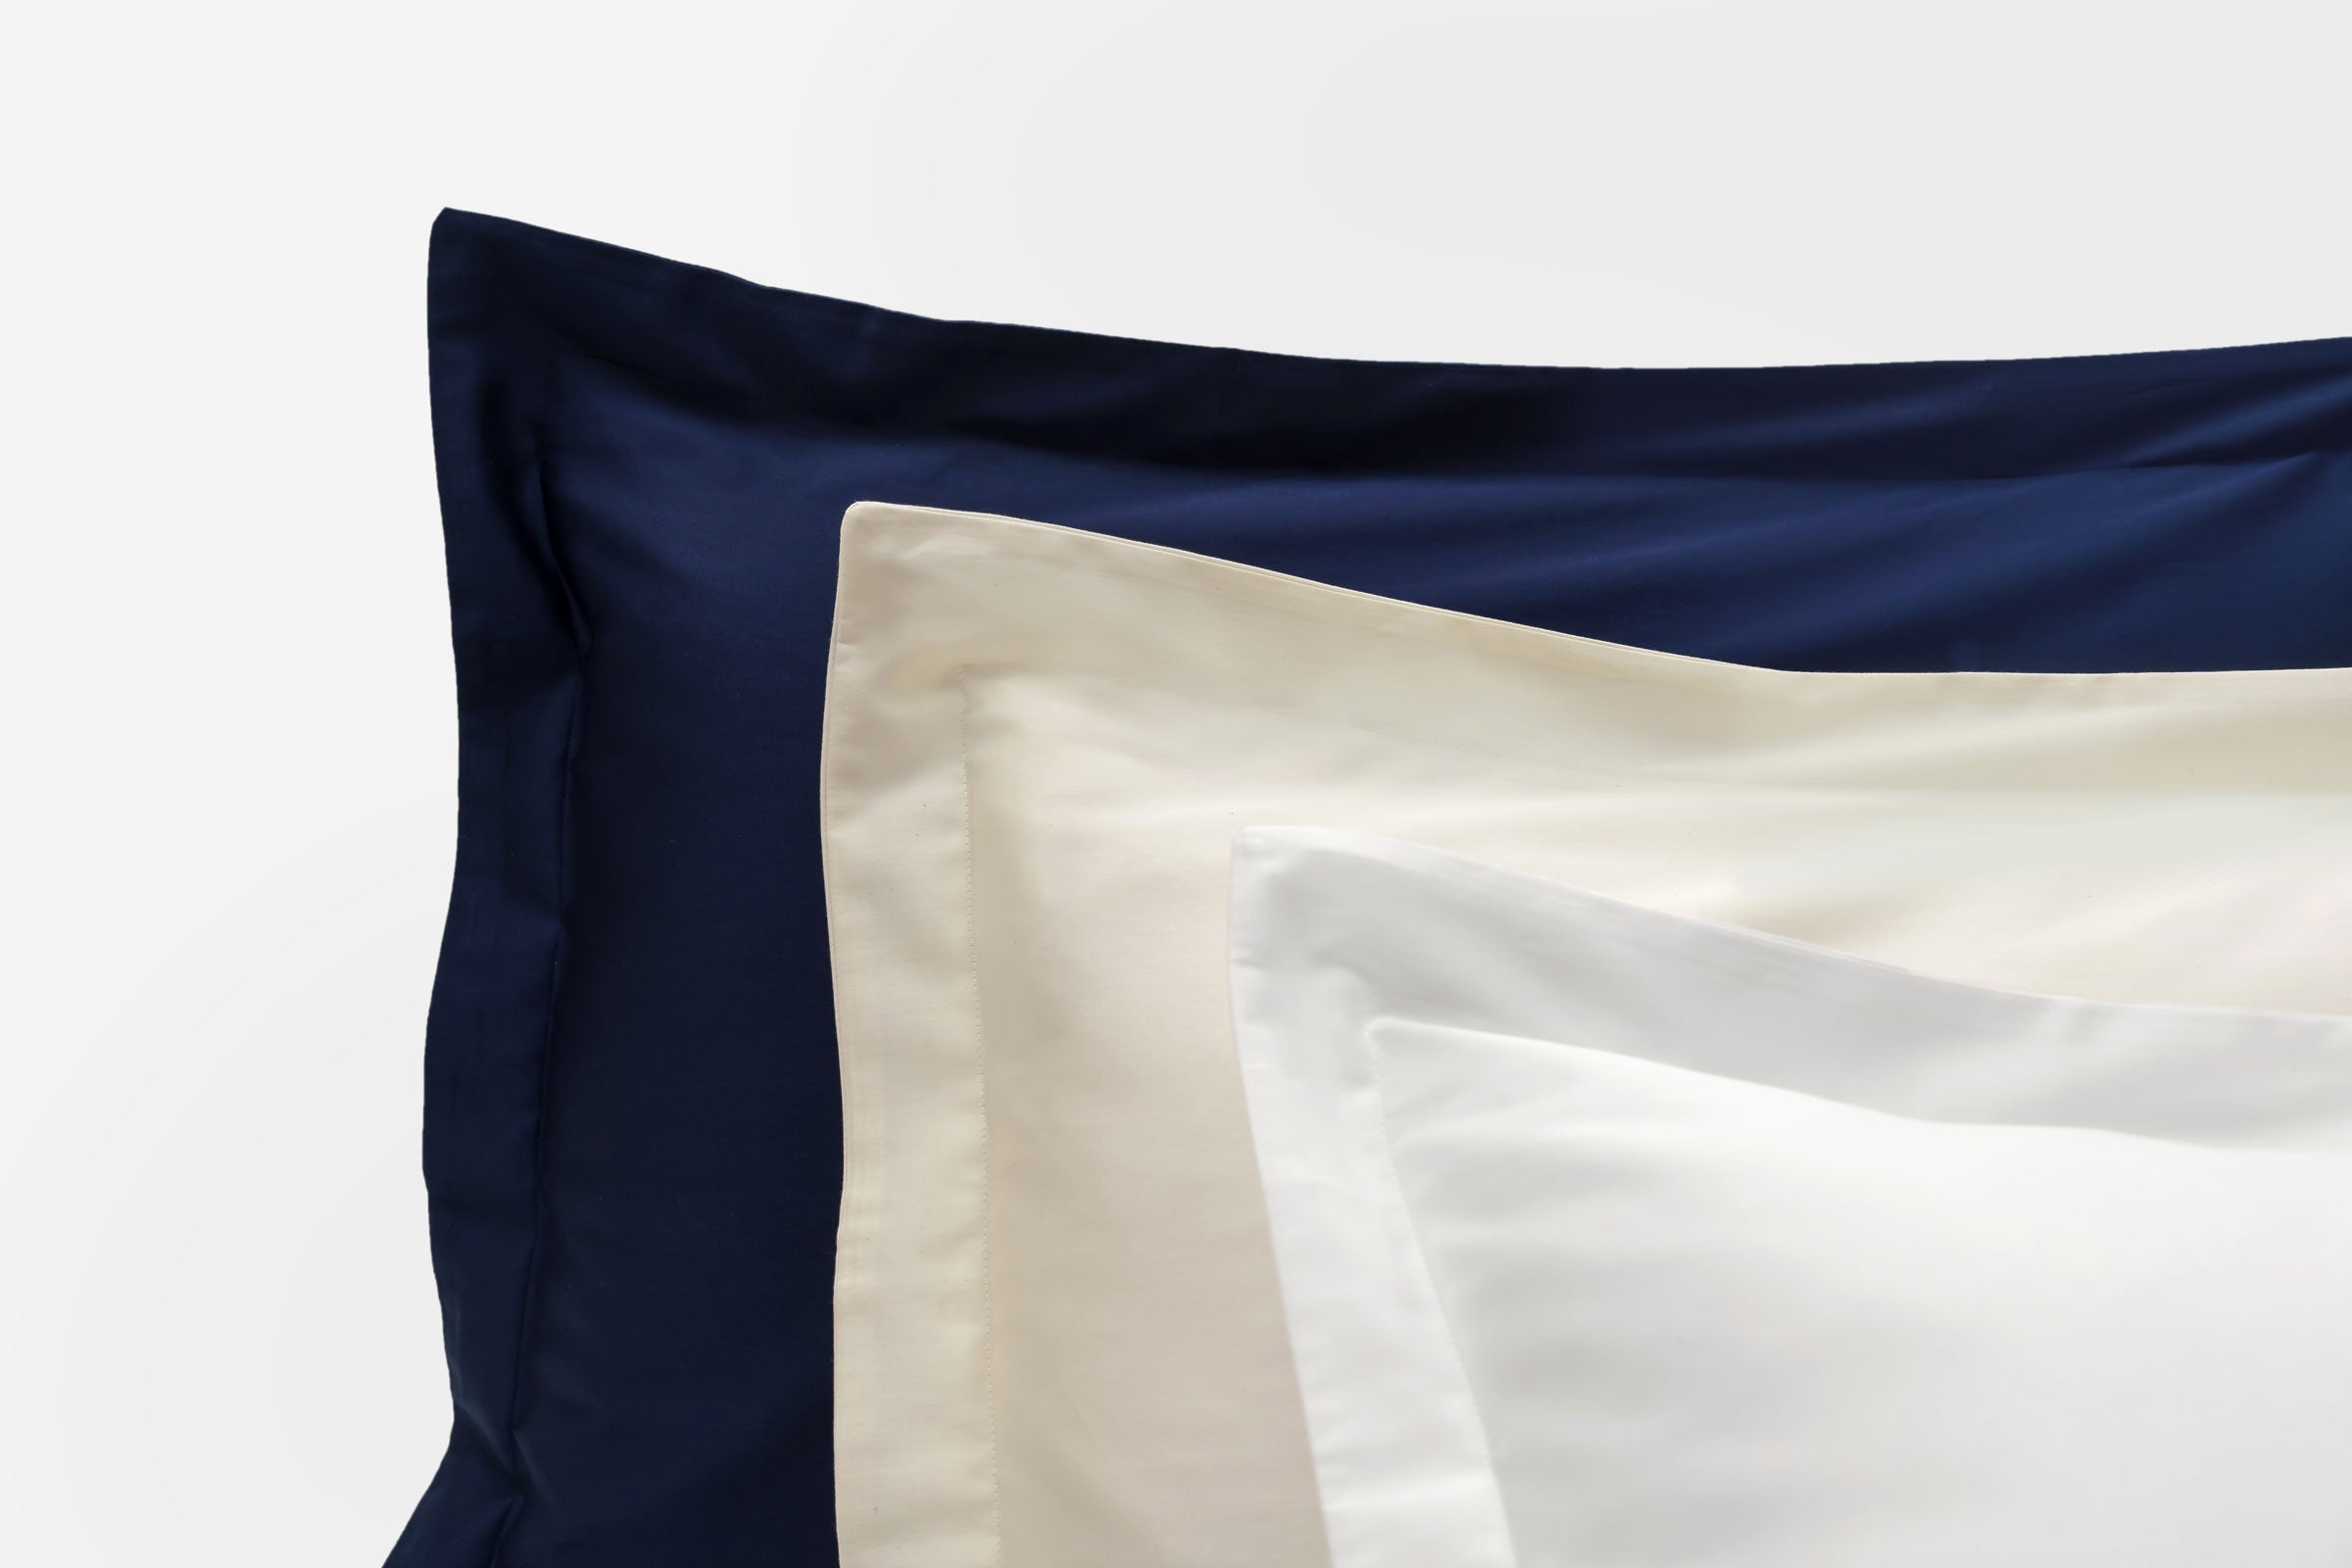 classic-navy-natural-white-oxford-pillowcase-pair-close-up-shot-by-sojao.jpg